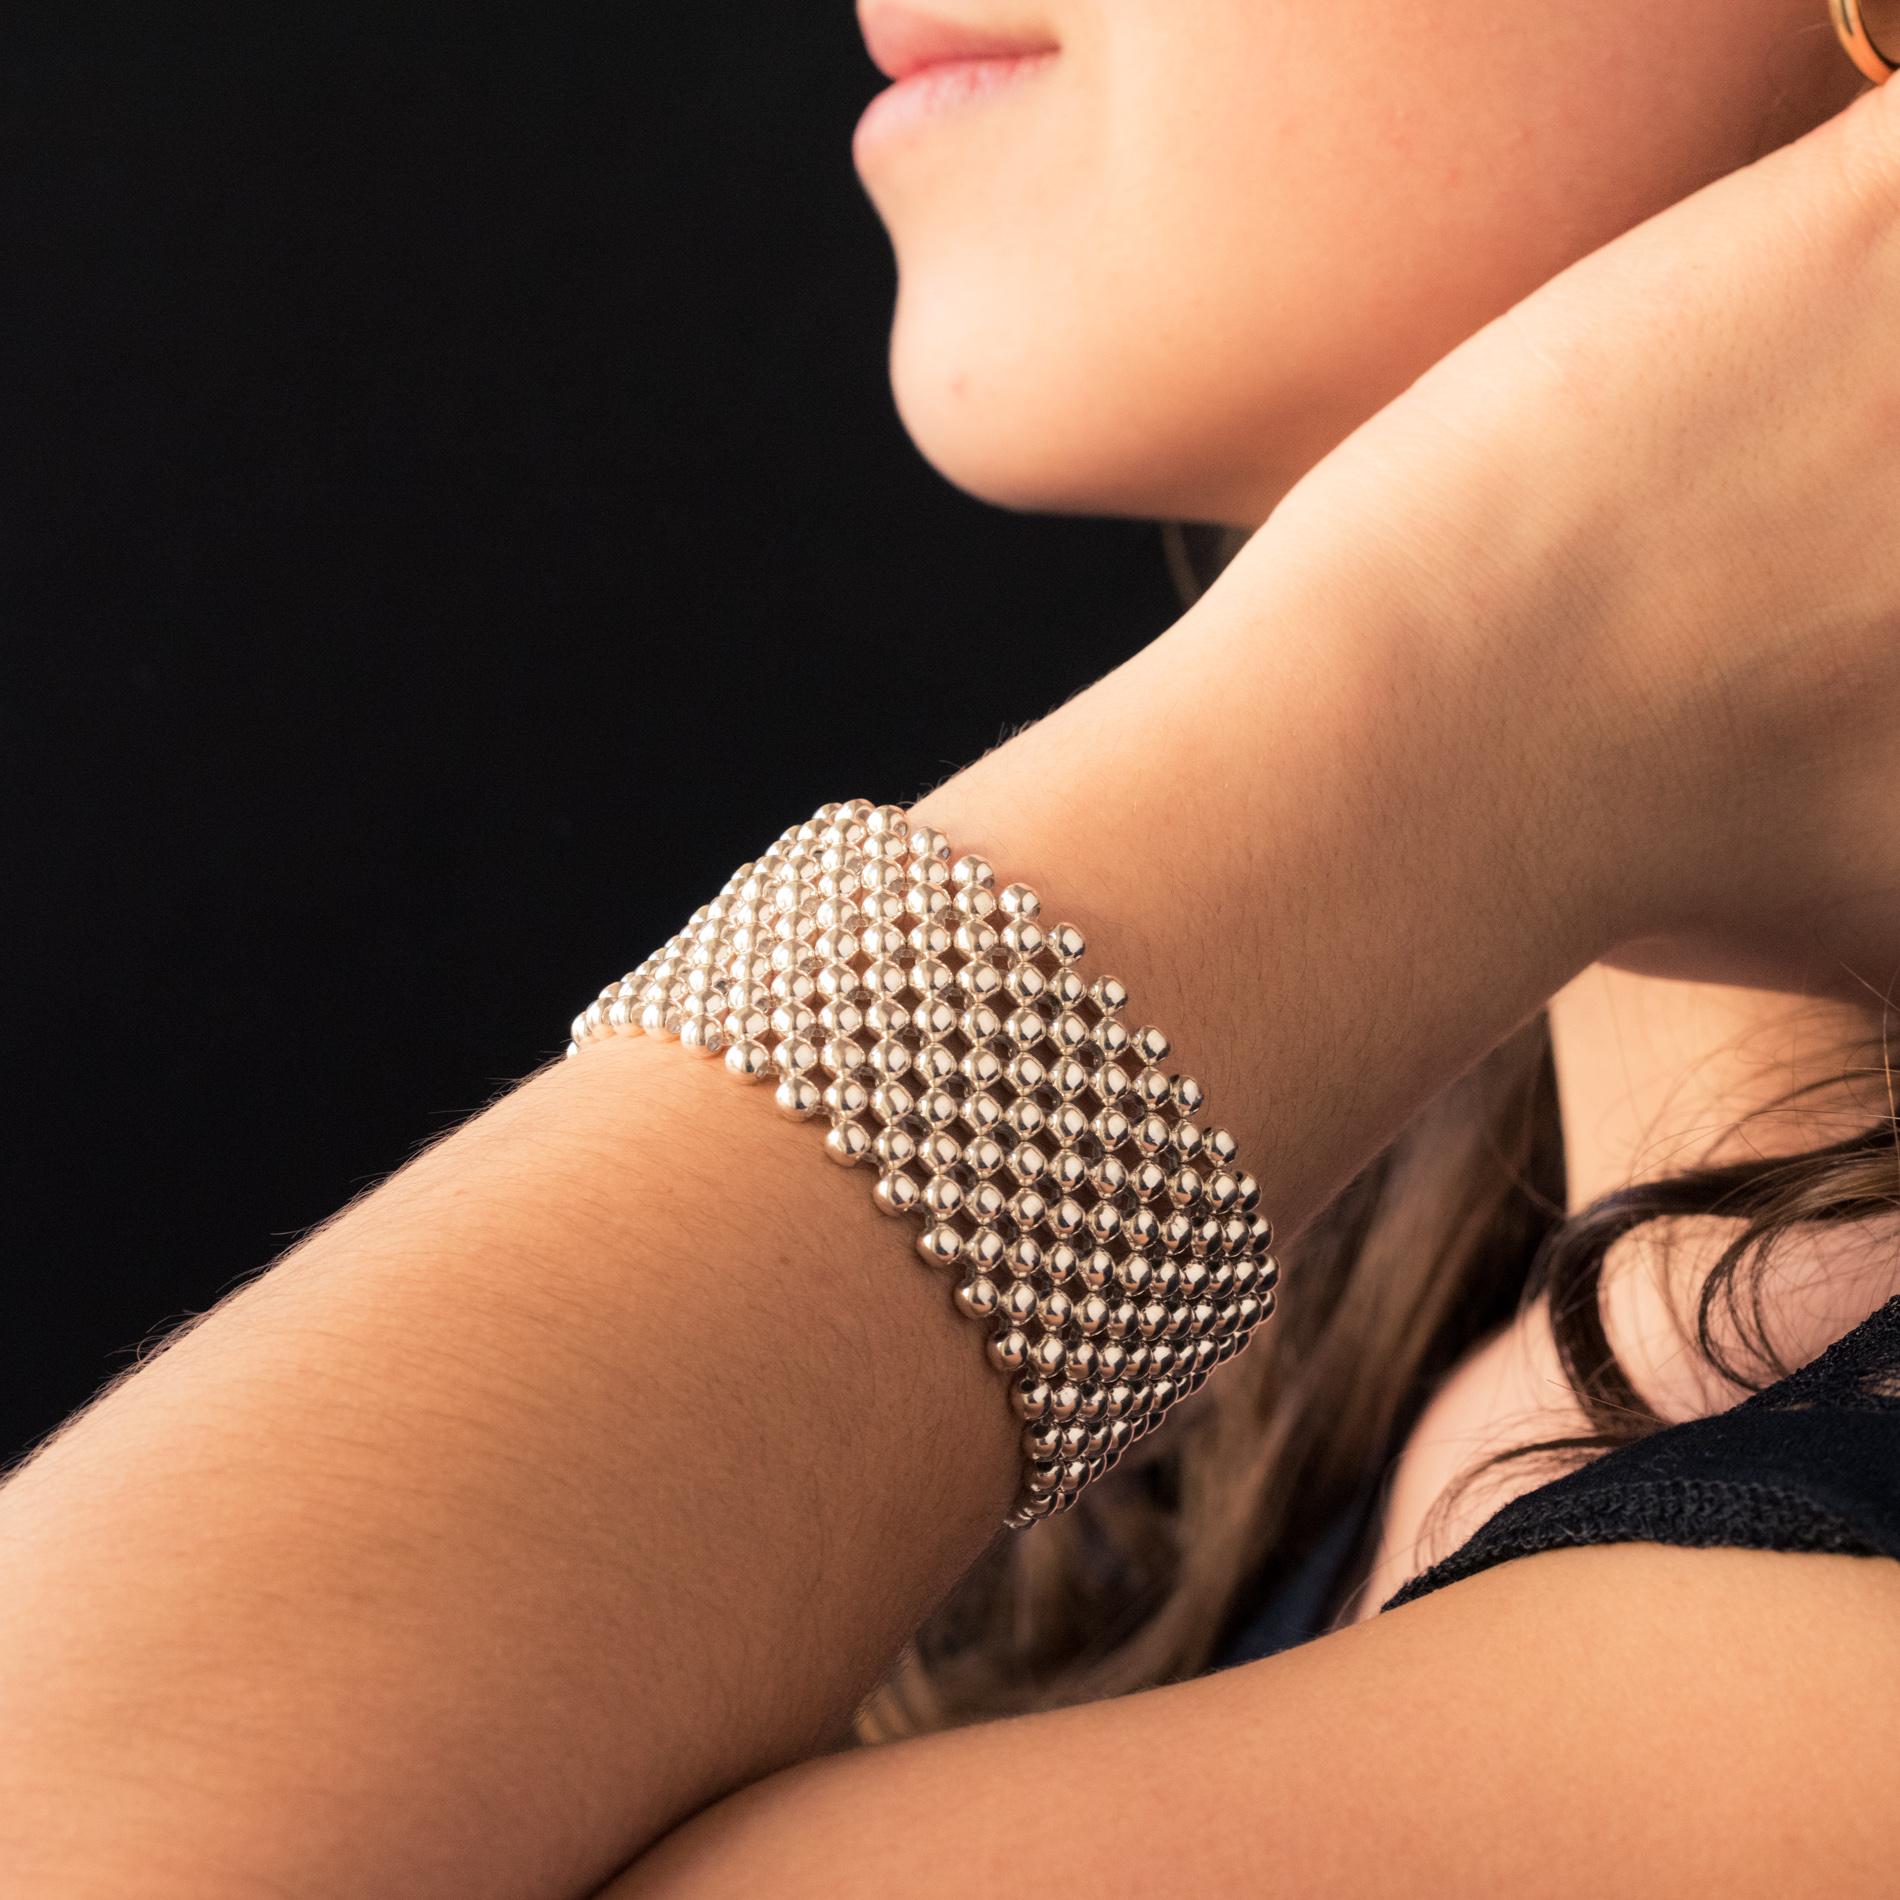 Bracelet in silver.
This sublime silver cuff bracelet is composed by a set of silver pearls set on acrylic thread making the whole bracelet elastic.
New bracelet.
Inner circumference: 16 cm, width: 3.2 cm, thickness: about 4 mm.
Total weight of the